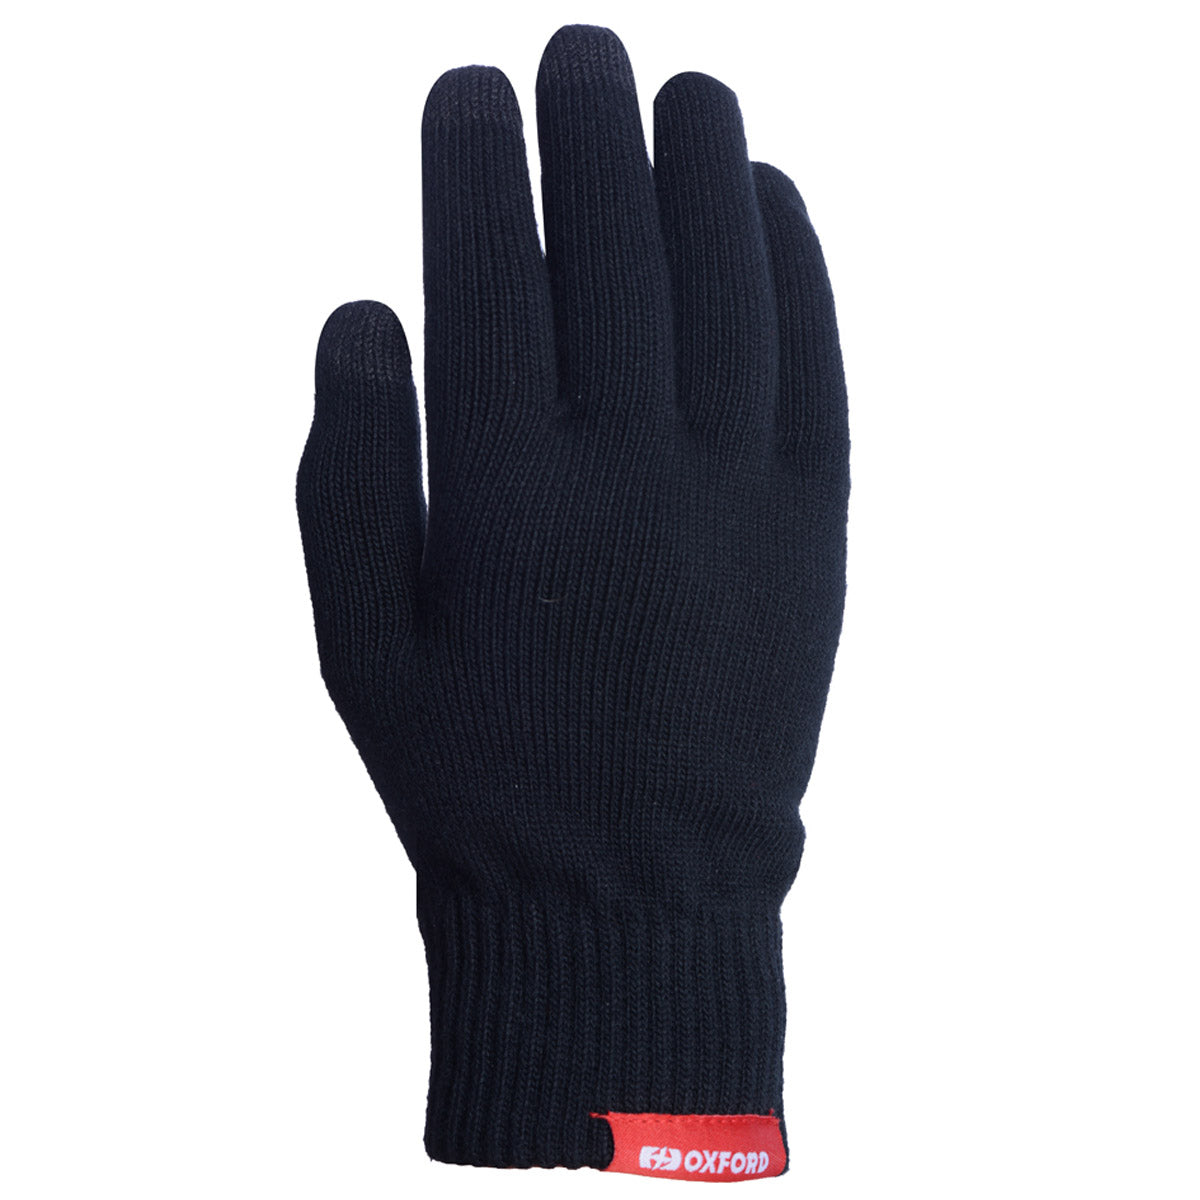 Thermal inner gloves are a great addition to any bikers wardrobe